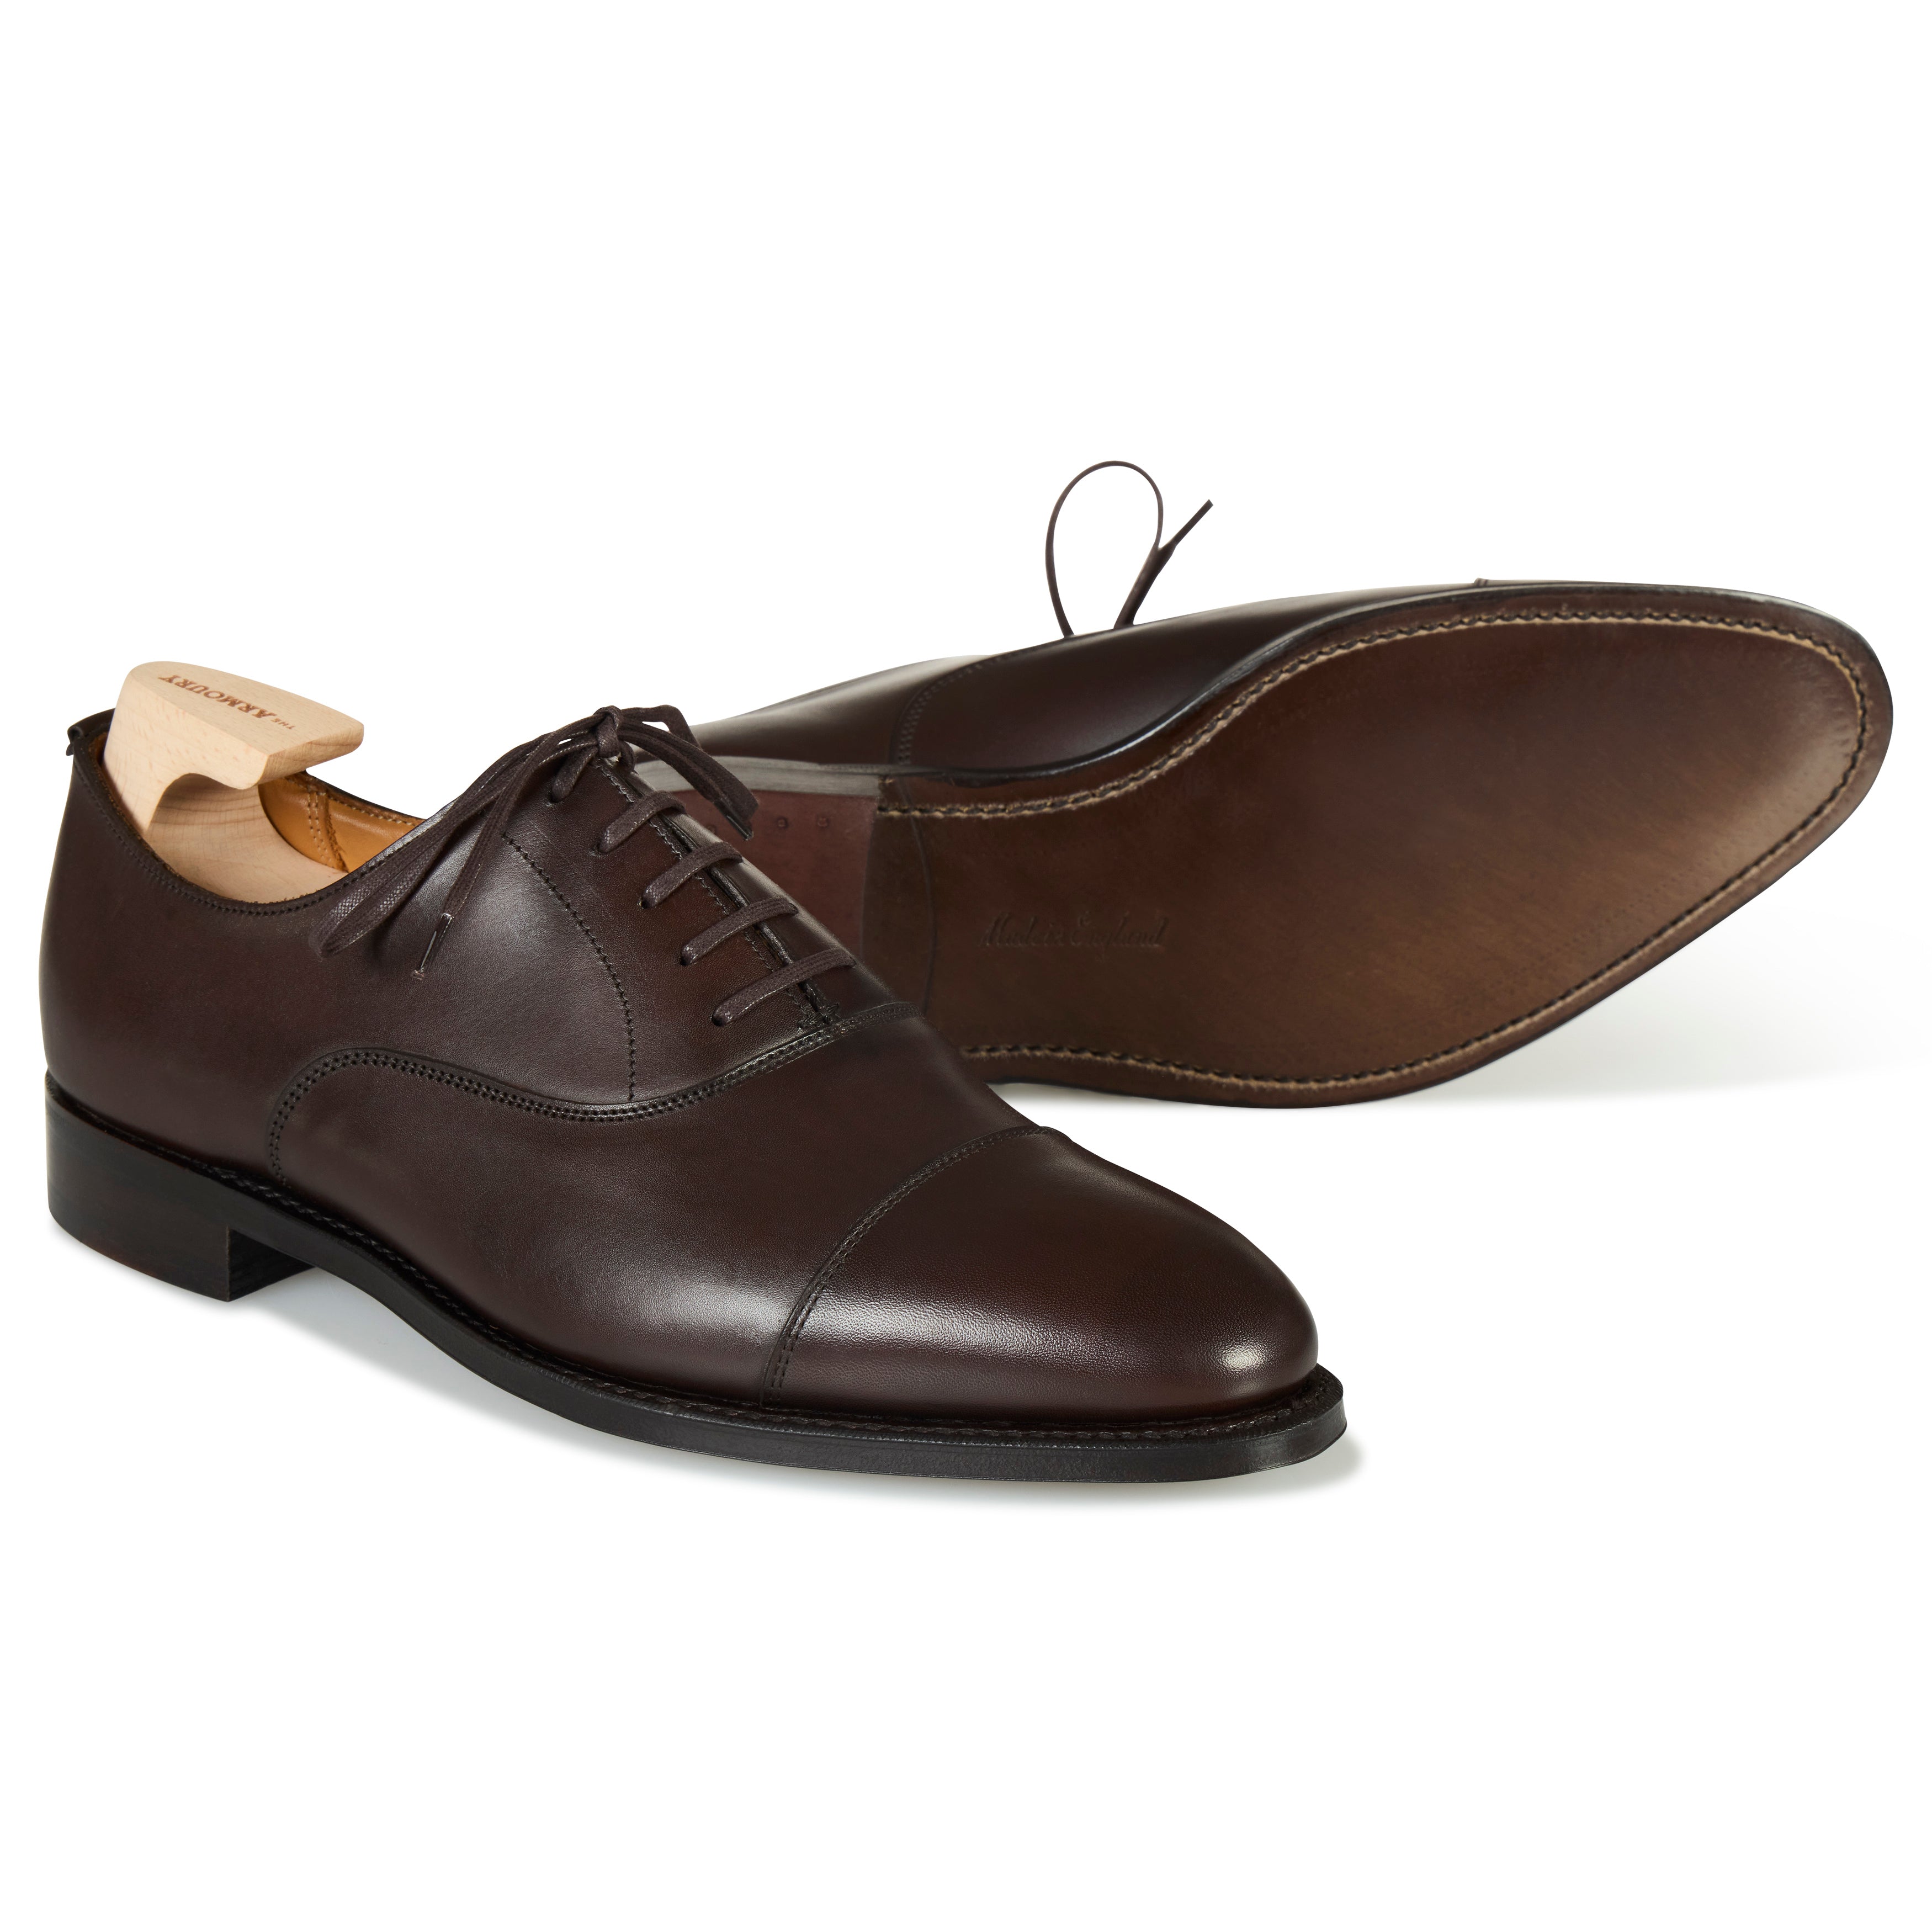 The Armoury Shoe Collection - The Armoury